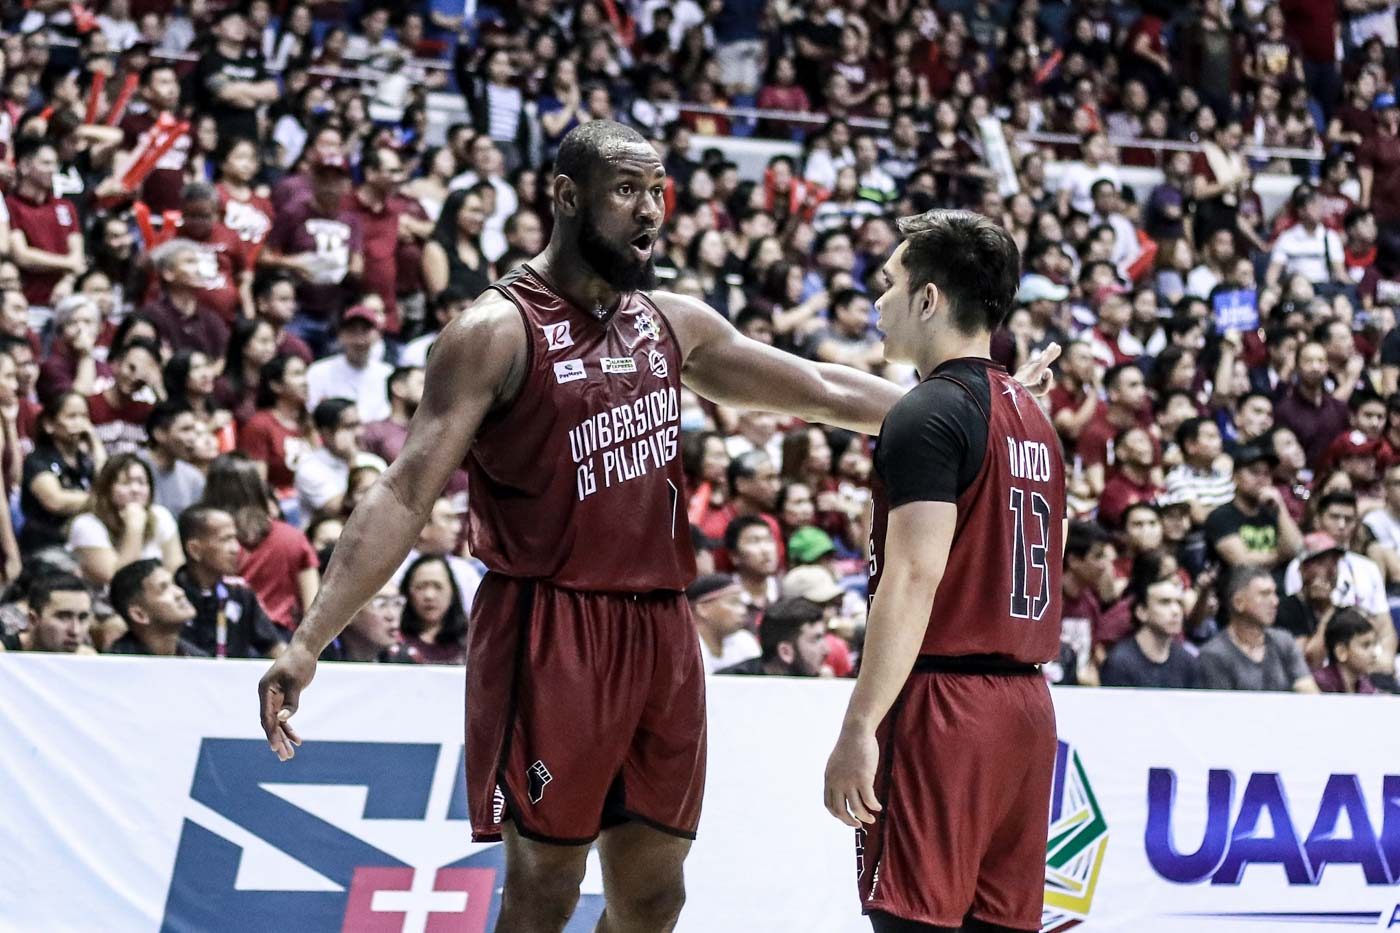 Akhuetie blasts ‘shitty’ officiating after blowout loss